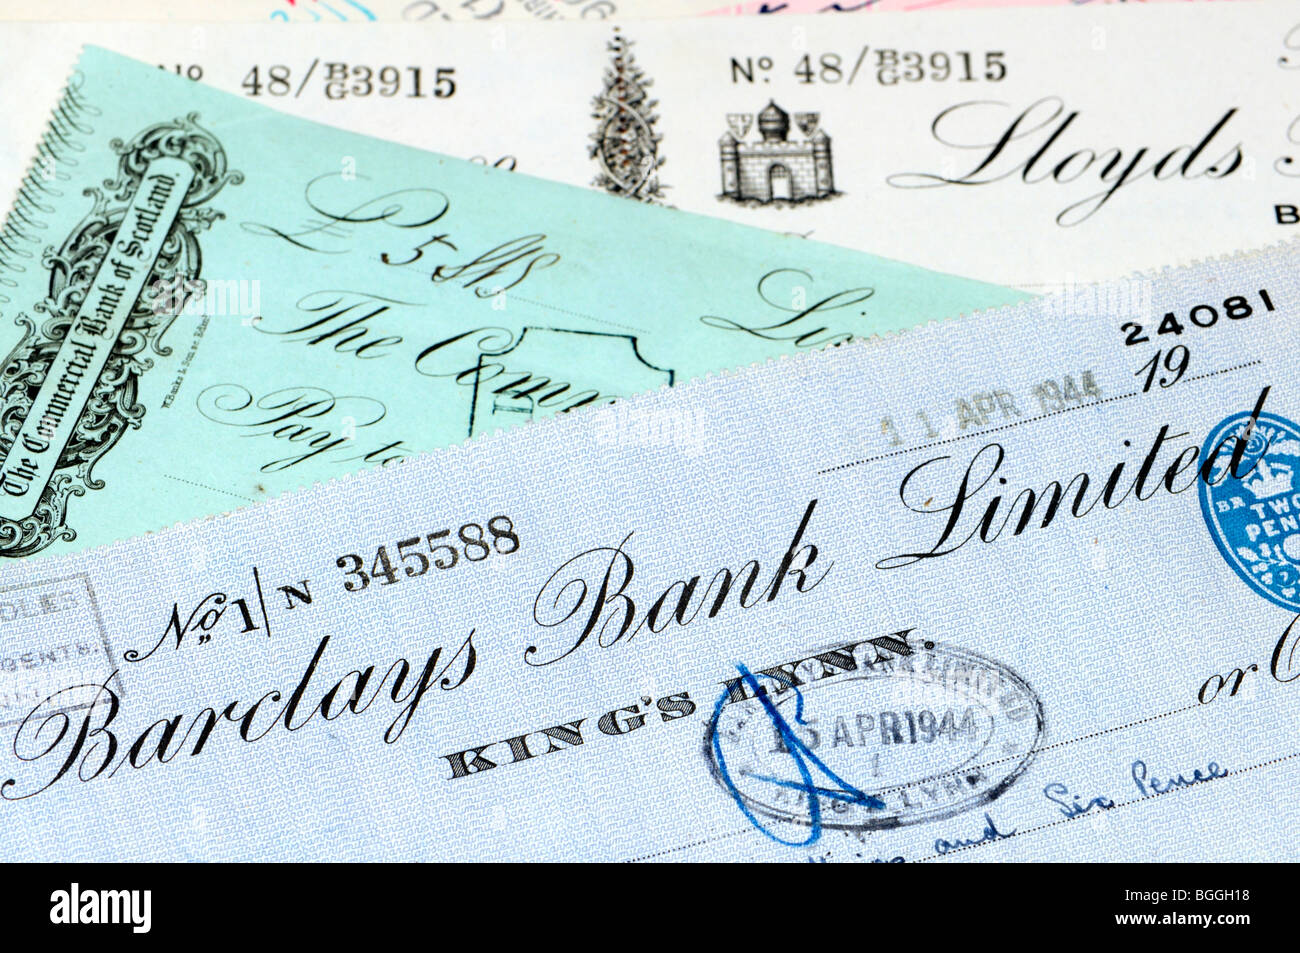 Old bank cheques Stock Photo